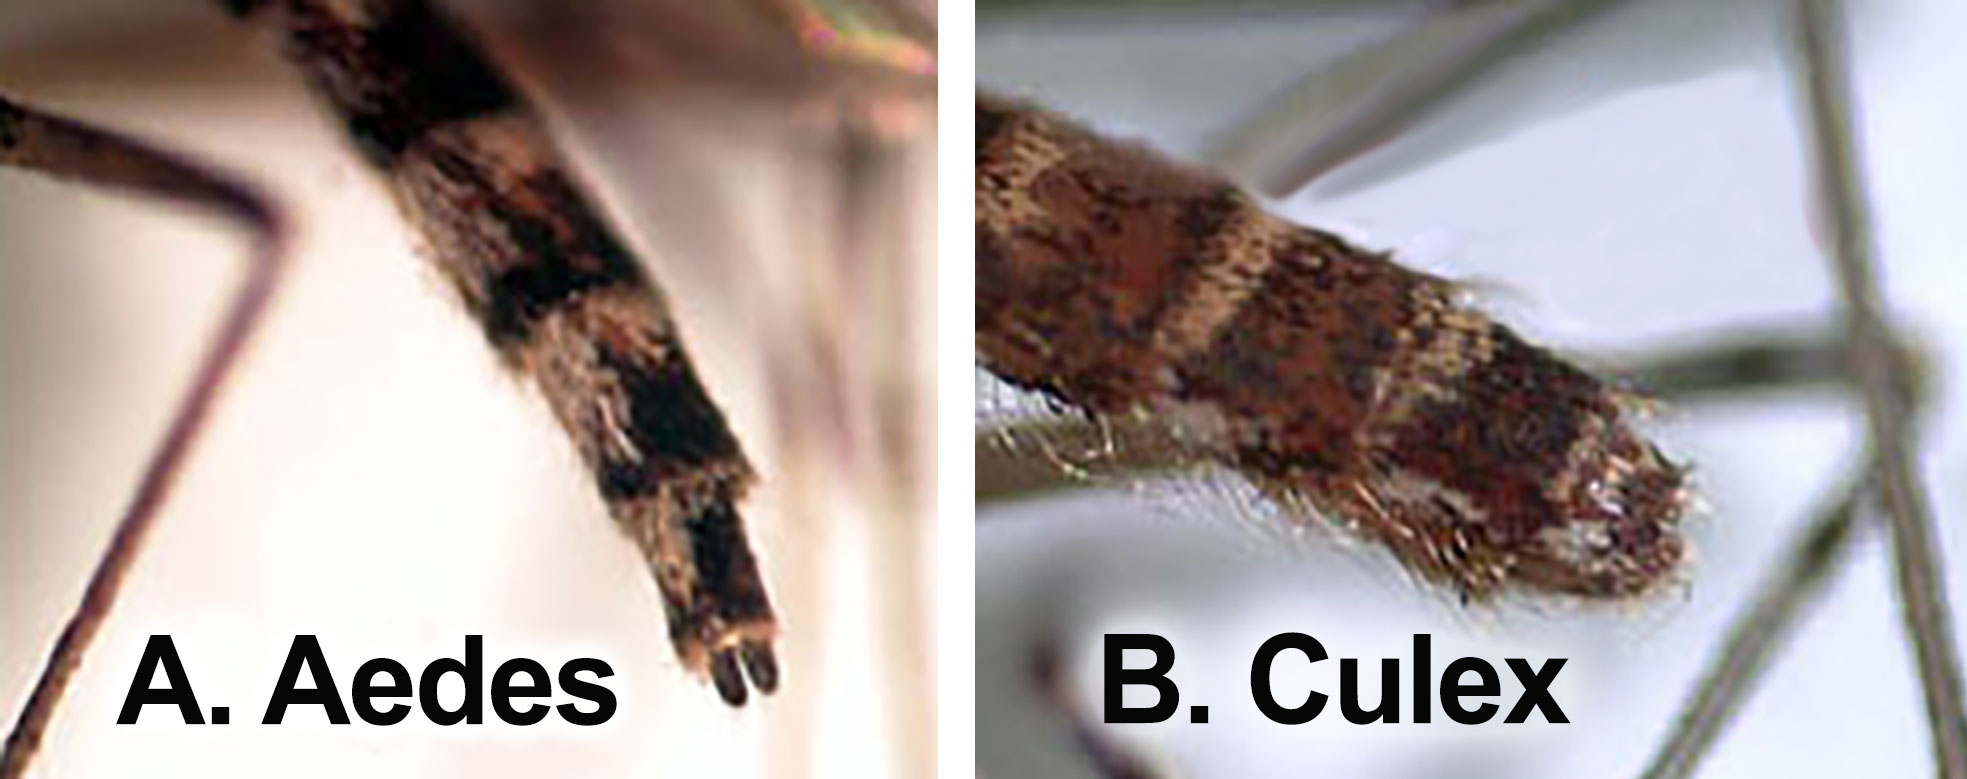 Two mosquito abdomens labeled A and B. A is a pointy Aedes mosquito abdomen. B is a broad Culex mosquito abdomen.